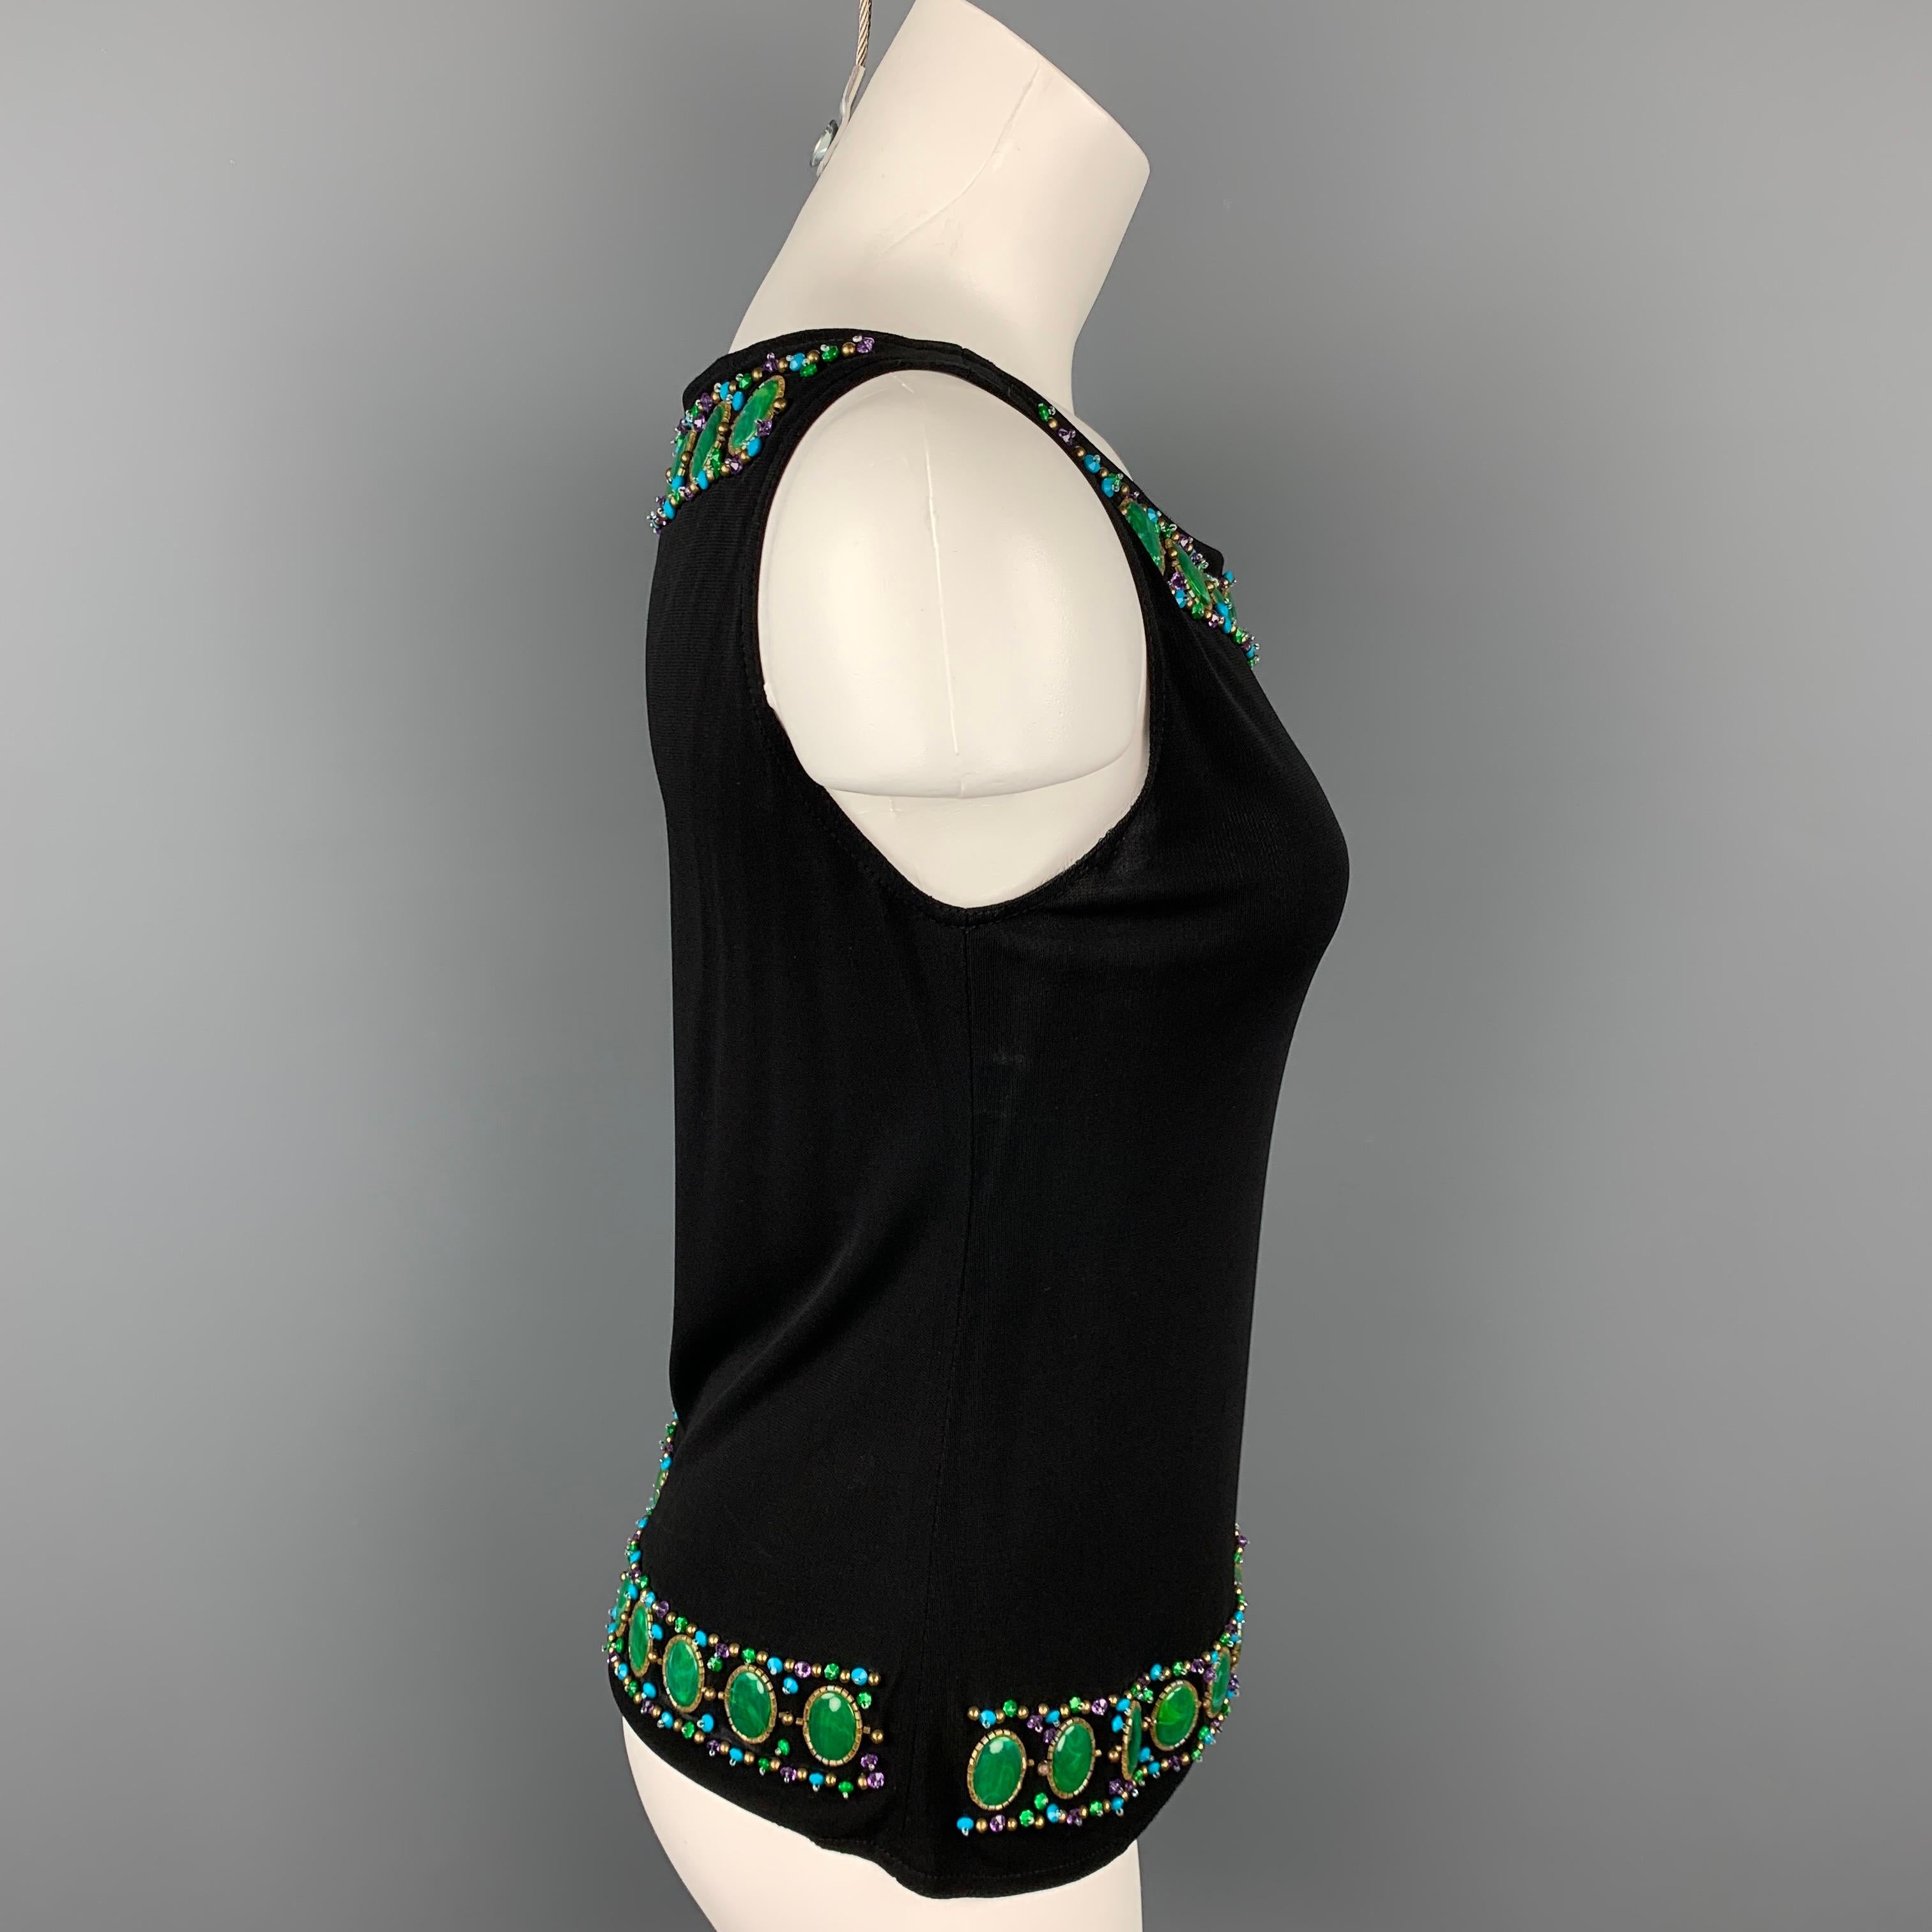 ANNA SUI tank dress top comes in a black rayon featuring a beaded trim design and a boat neck. Made in USA.

Very Good Pre-Owned Condition.
Marked: 6

Measurements:

Shoulder: 12.5 in.
Bust: 30 in.
Length: 21 in. 